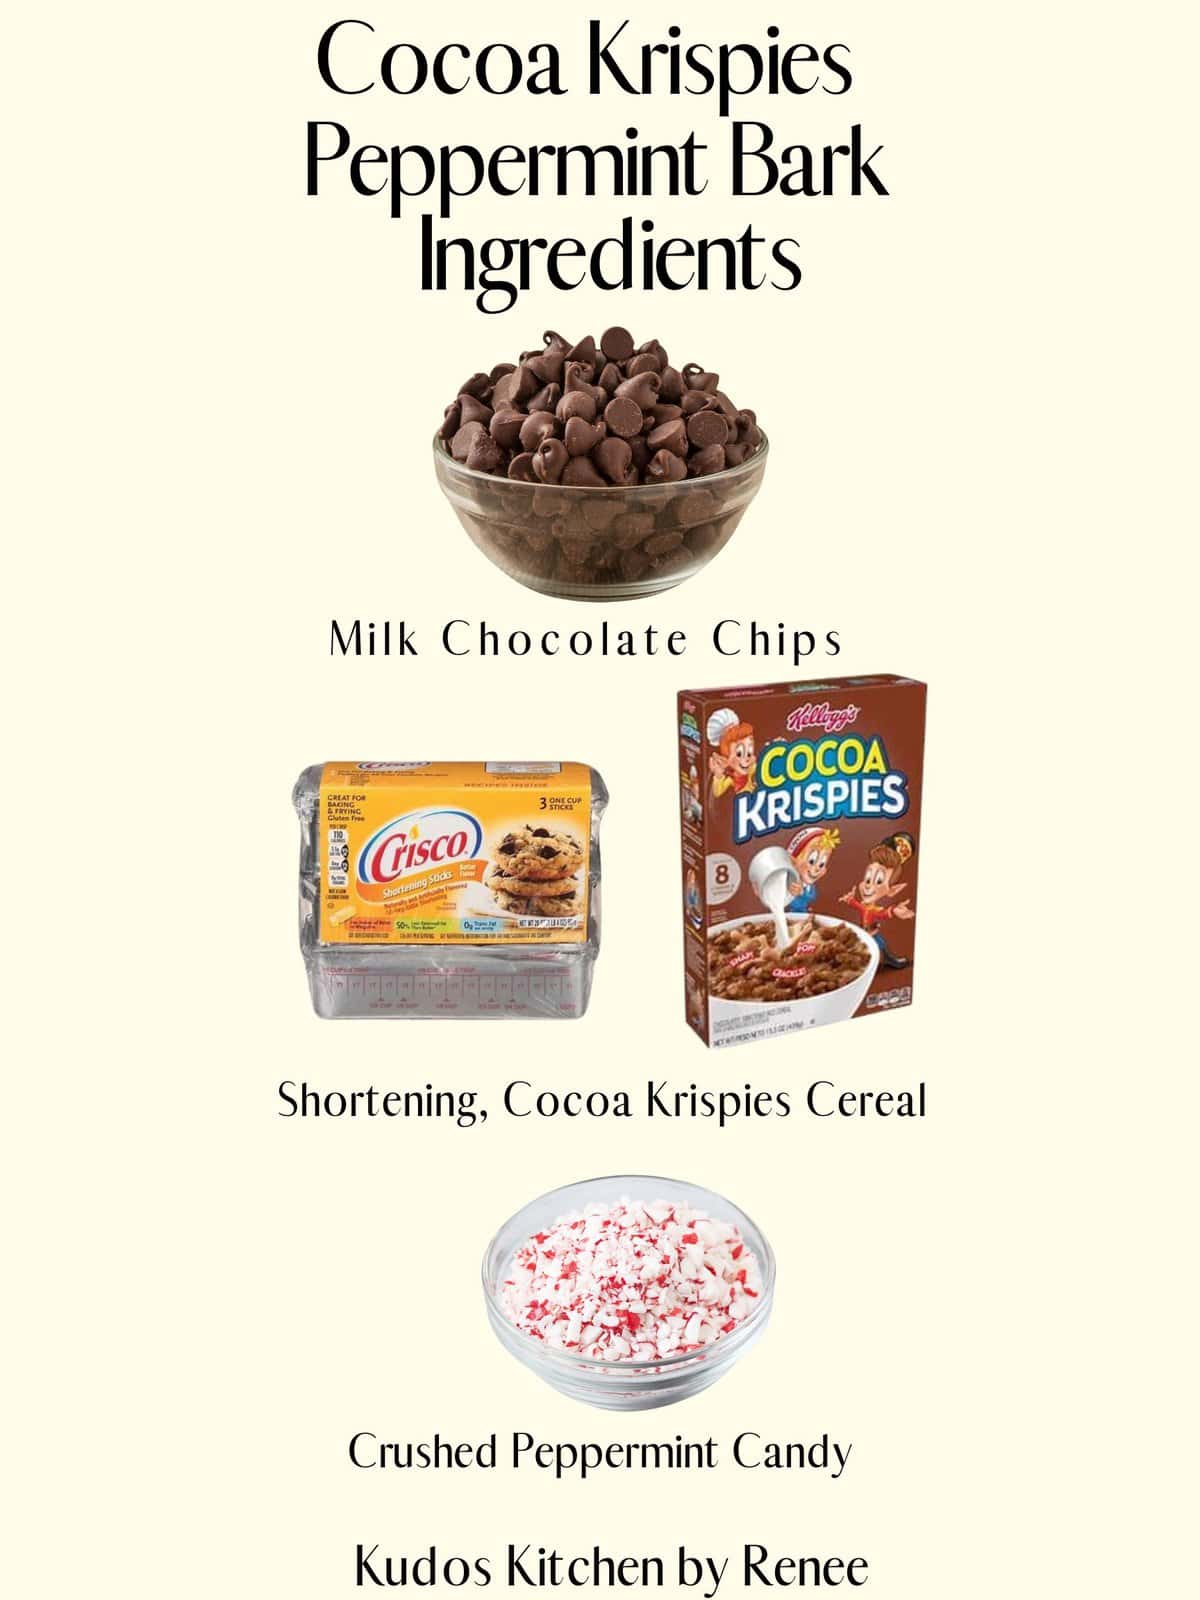 A visual ingredient list for making Cocoa Krispies Peppermint Bark.